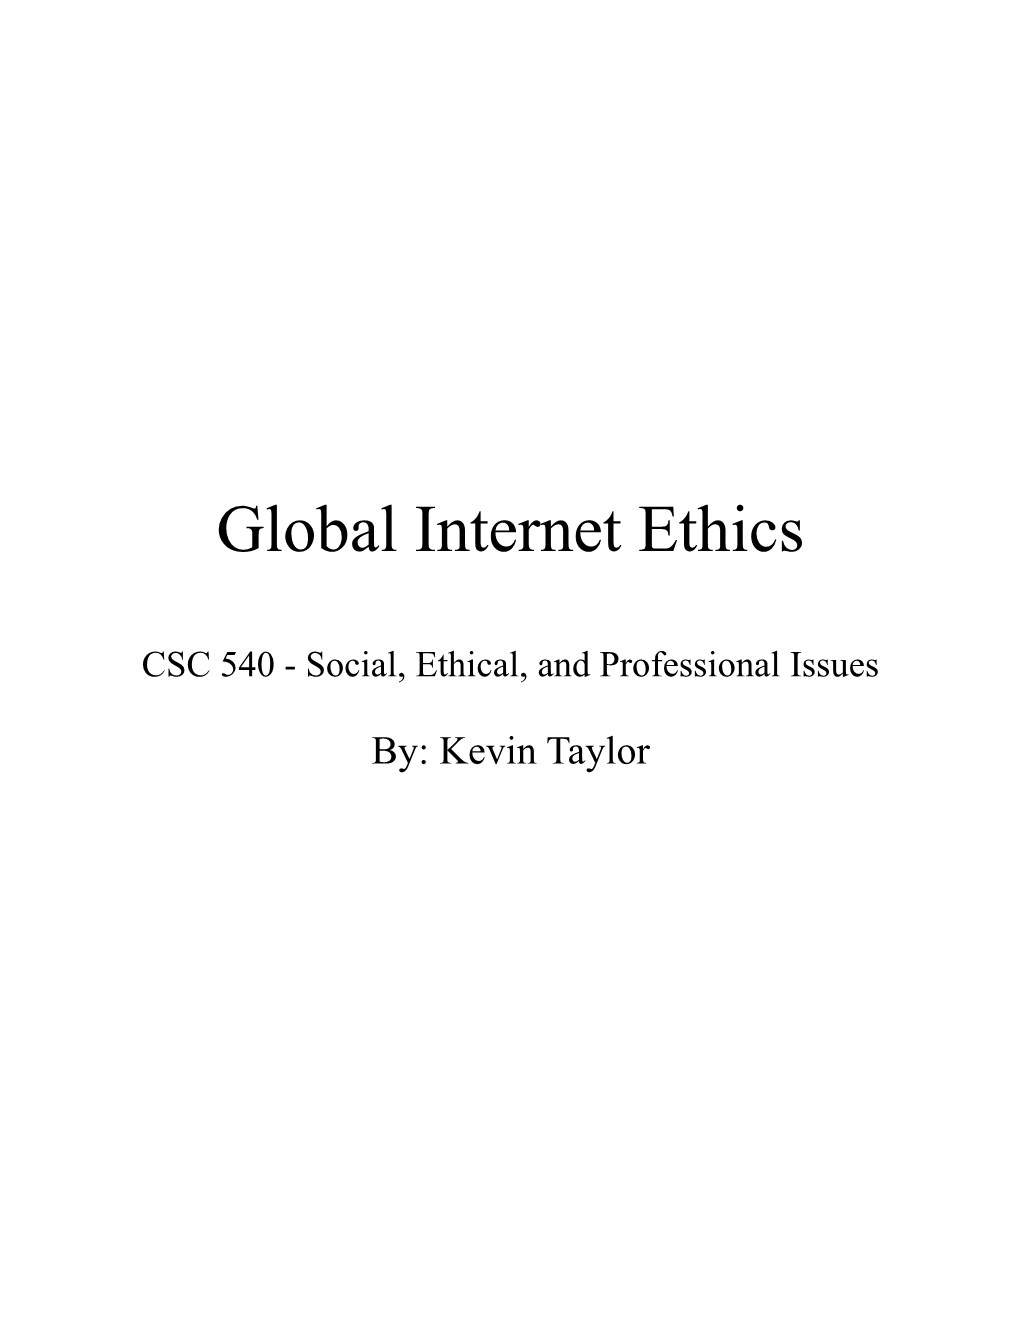 CSC 540 - Social, Ethical, and Professional Issues